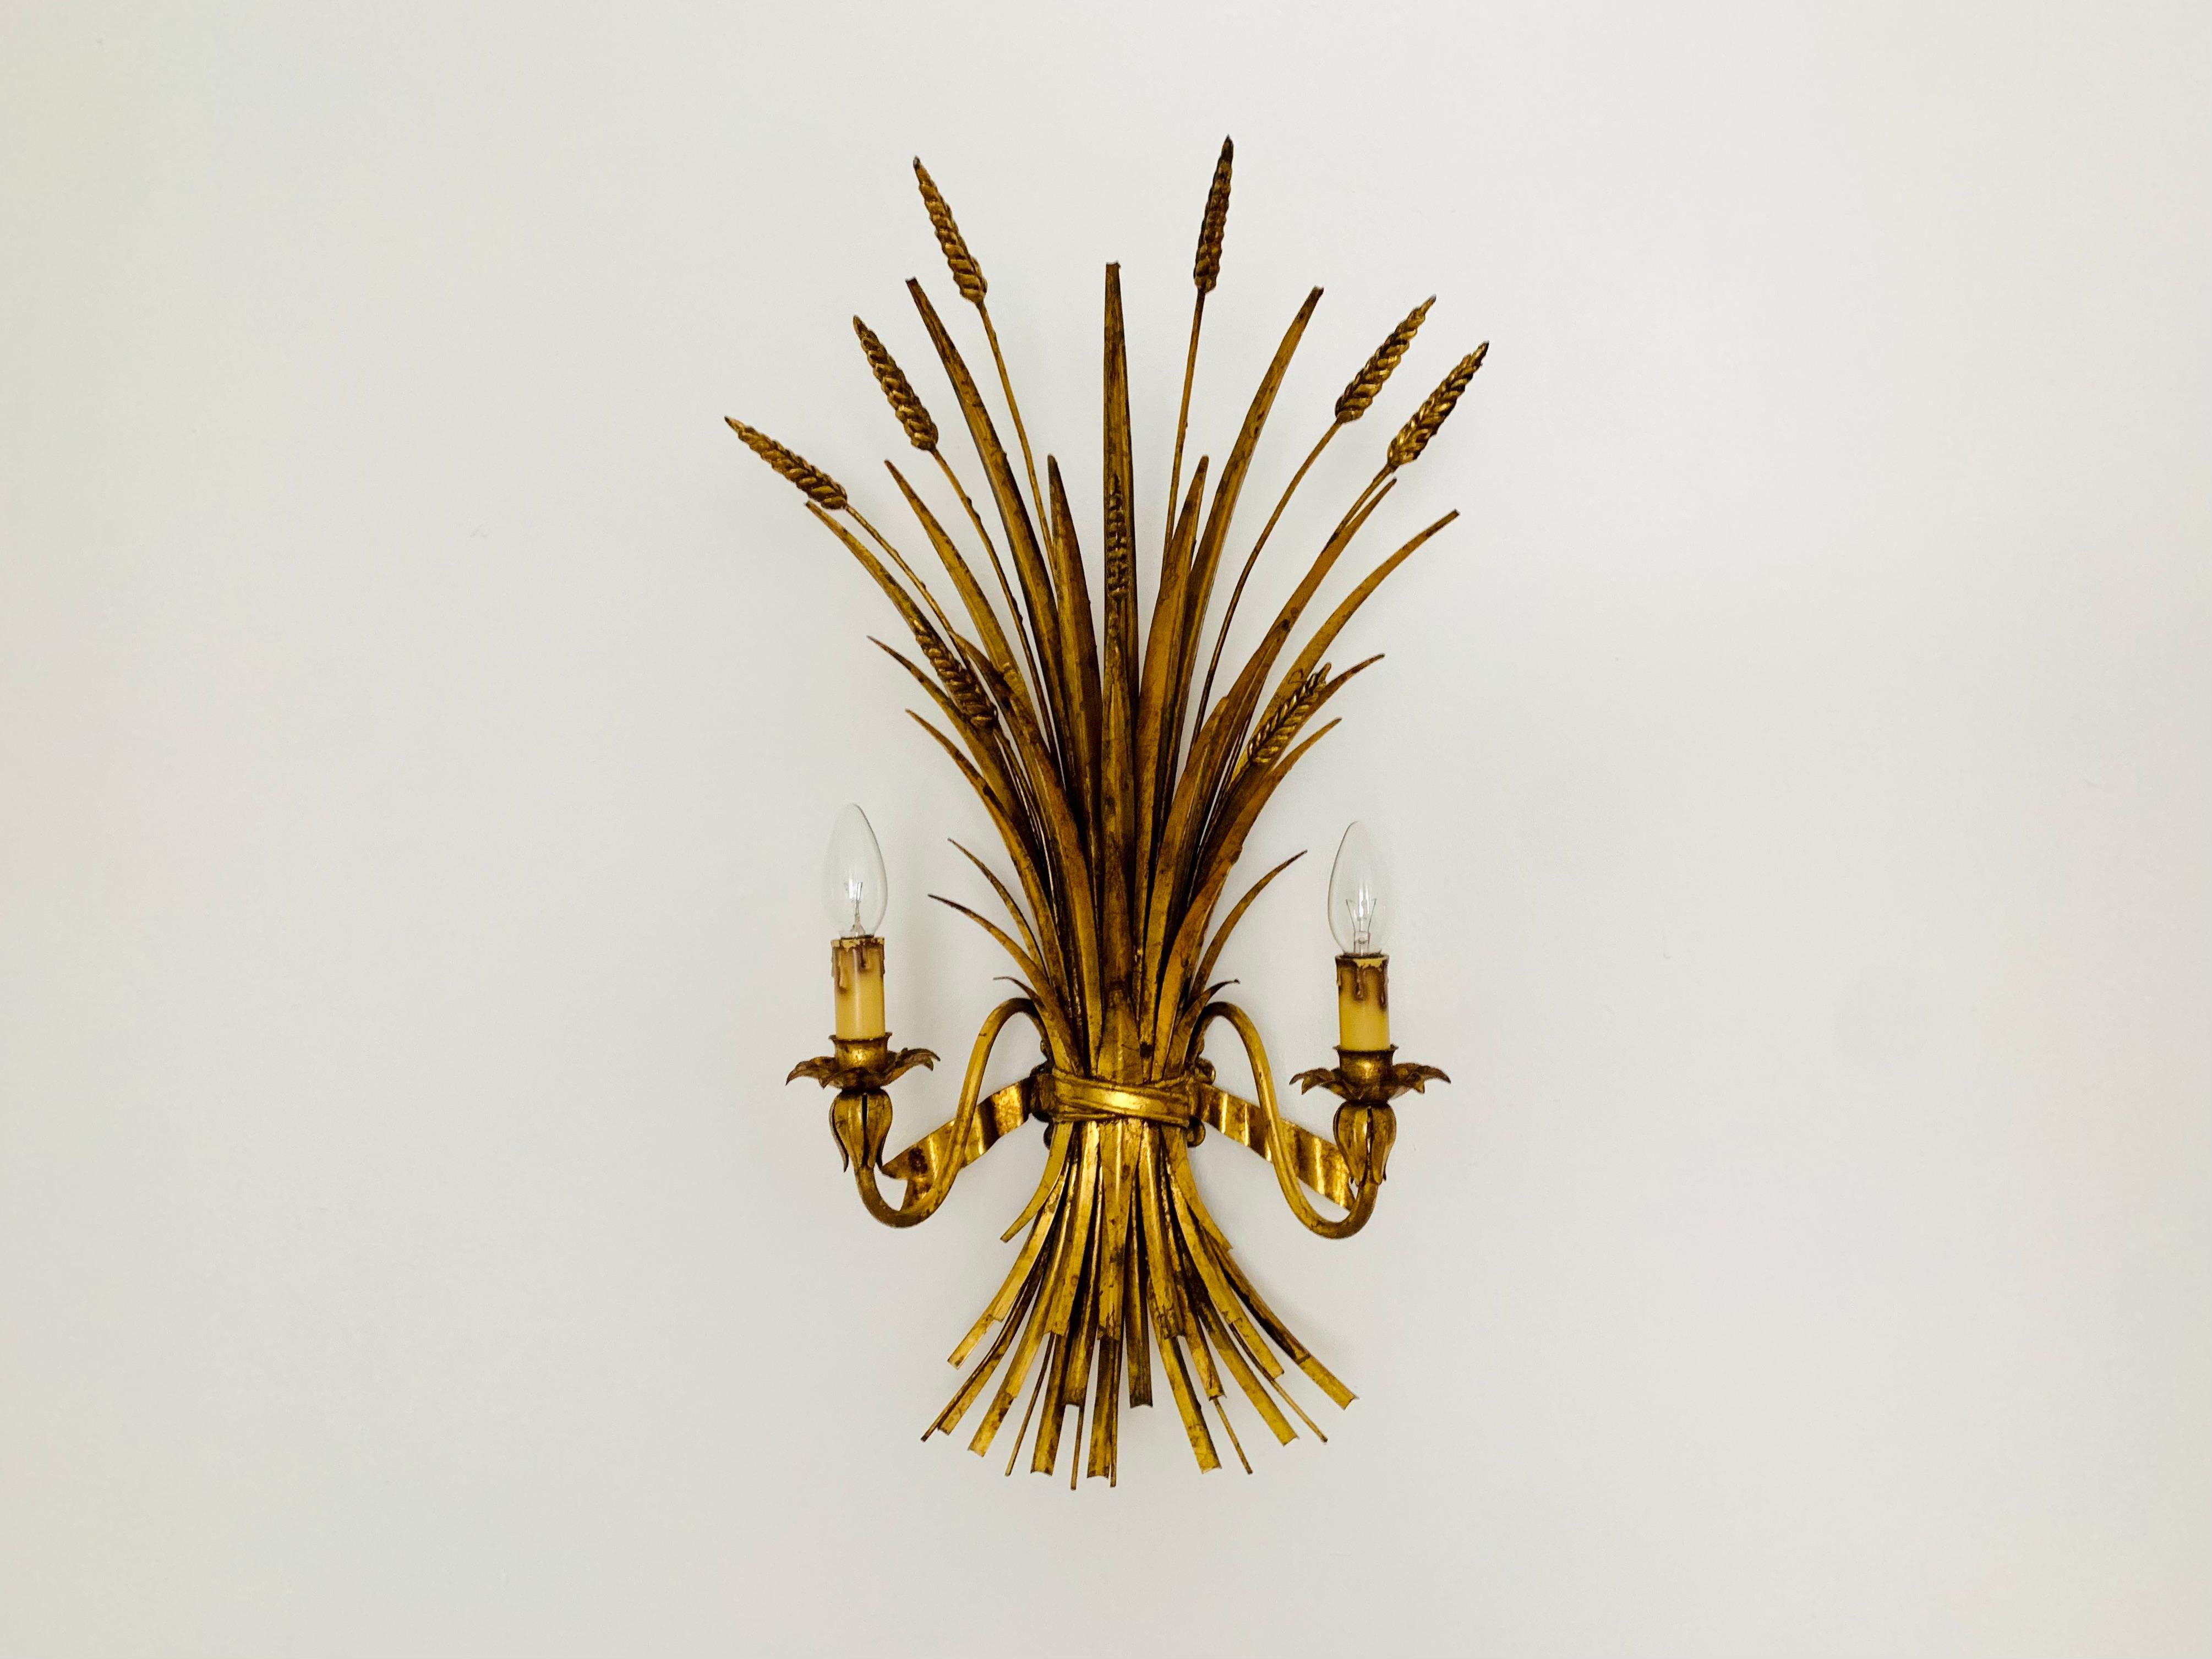 Very nice gilded wall lamp by Hans Kögl from the 1970s.
Great design and high-quality workmanship.
A wonderful play of light is created.

Condition:

Very good vintage condition with slight signs of wear consistent with age.
Spotted patina and loss